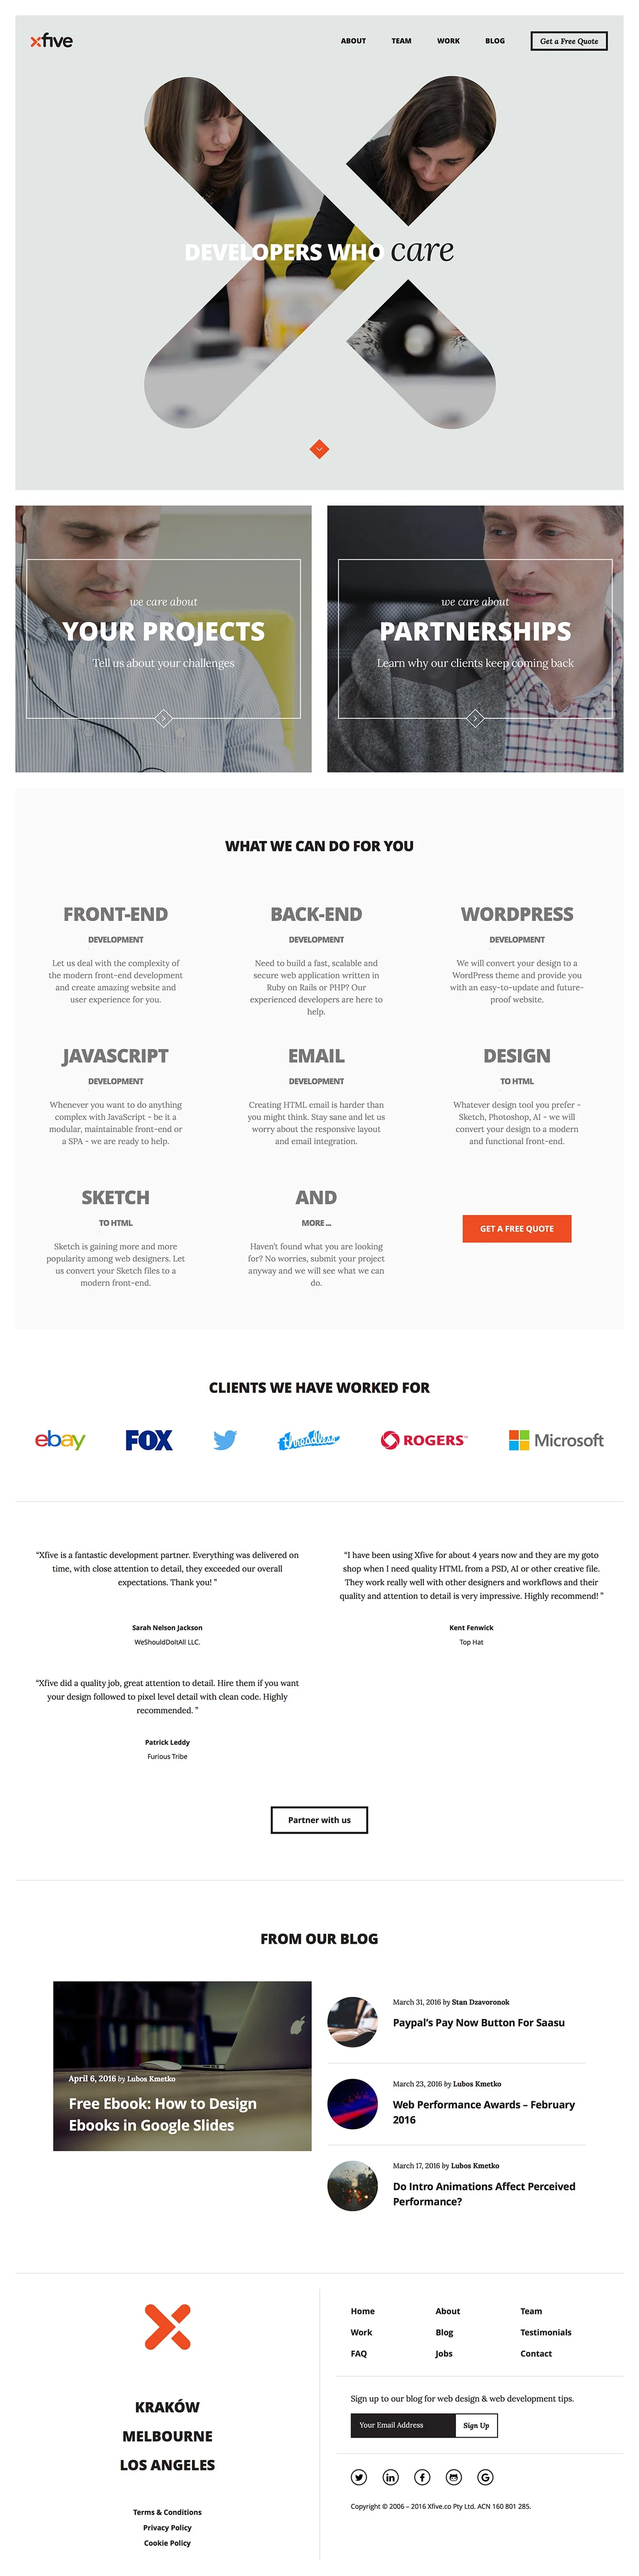 Xfive Landing Page Example: Your project is in good hands with the web developers who care. Xfive will code your website or application with the highest standards